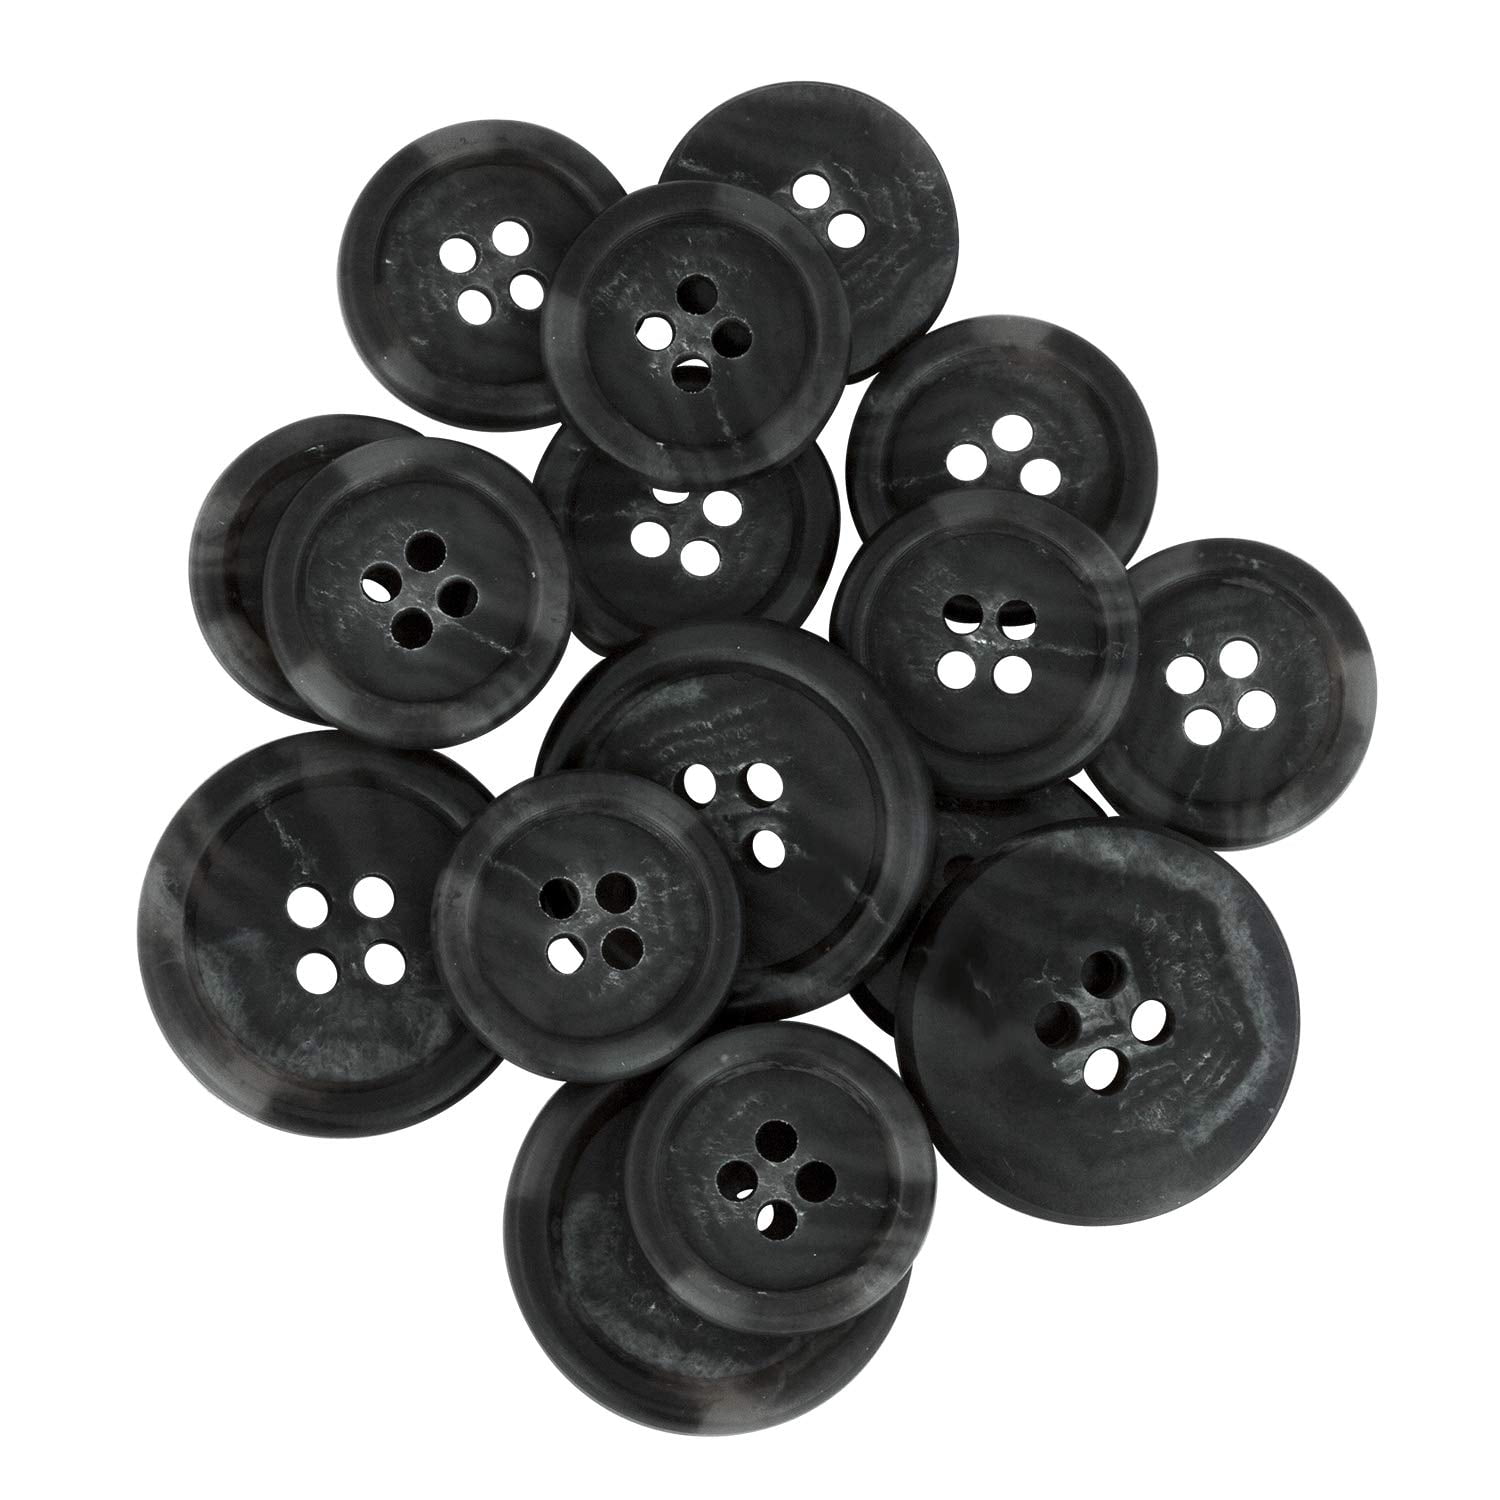 ButtonMode Regular Suit Buttons 16pc Set includes 4 Buttons measuring 20mm  (3/4 Inch) for Jacket Front, 12 Buttons measuring 15mm (9/16 Inch) for